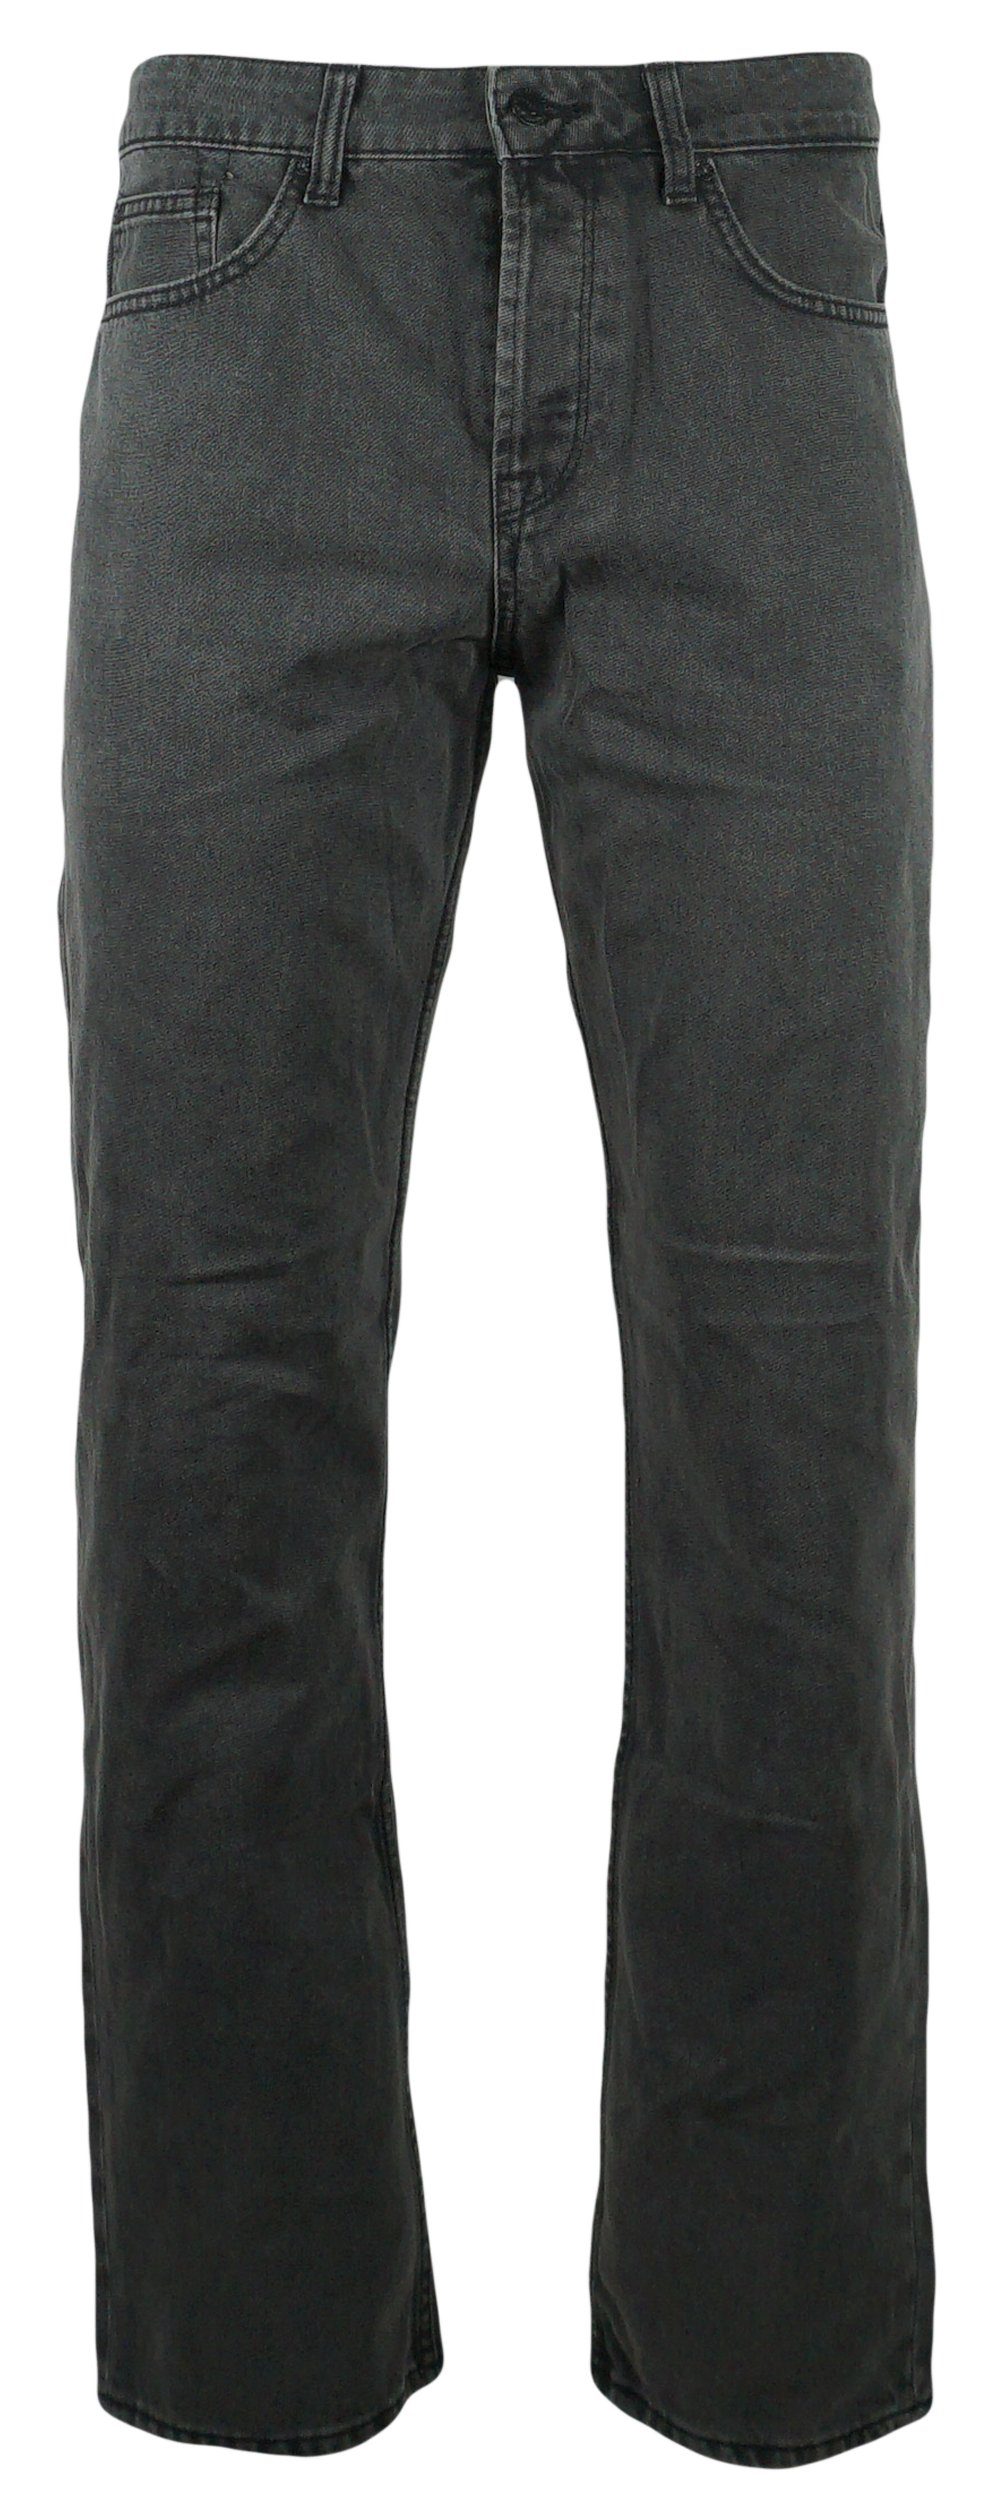 & Jeans Sons Only & 5-Pocket-Jeans ONLY SONS